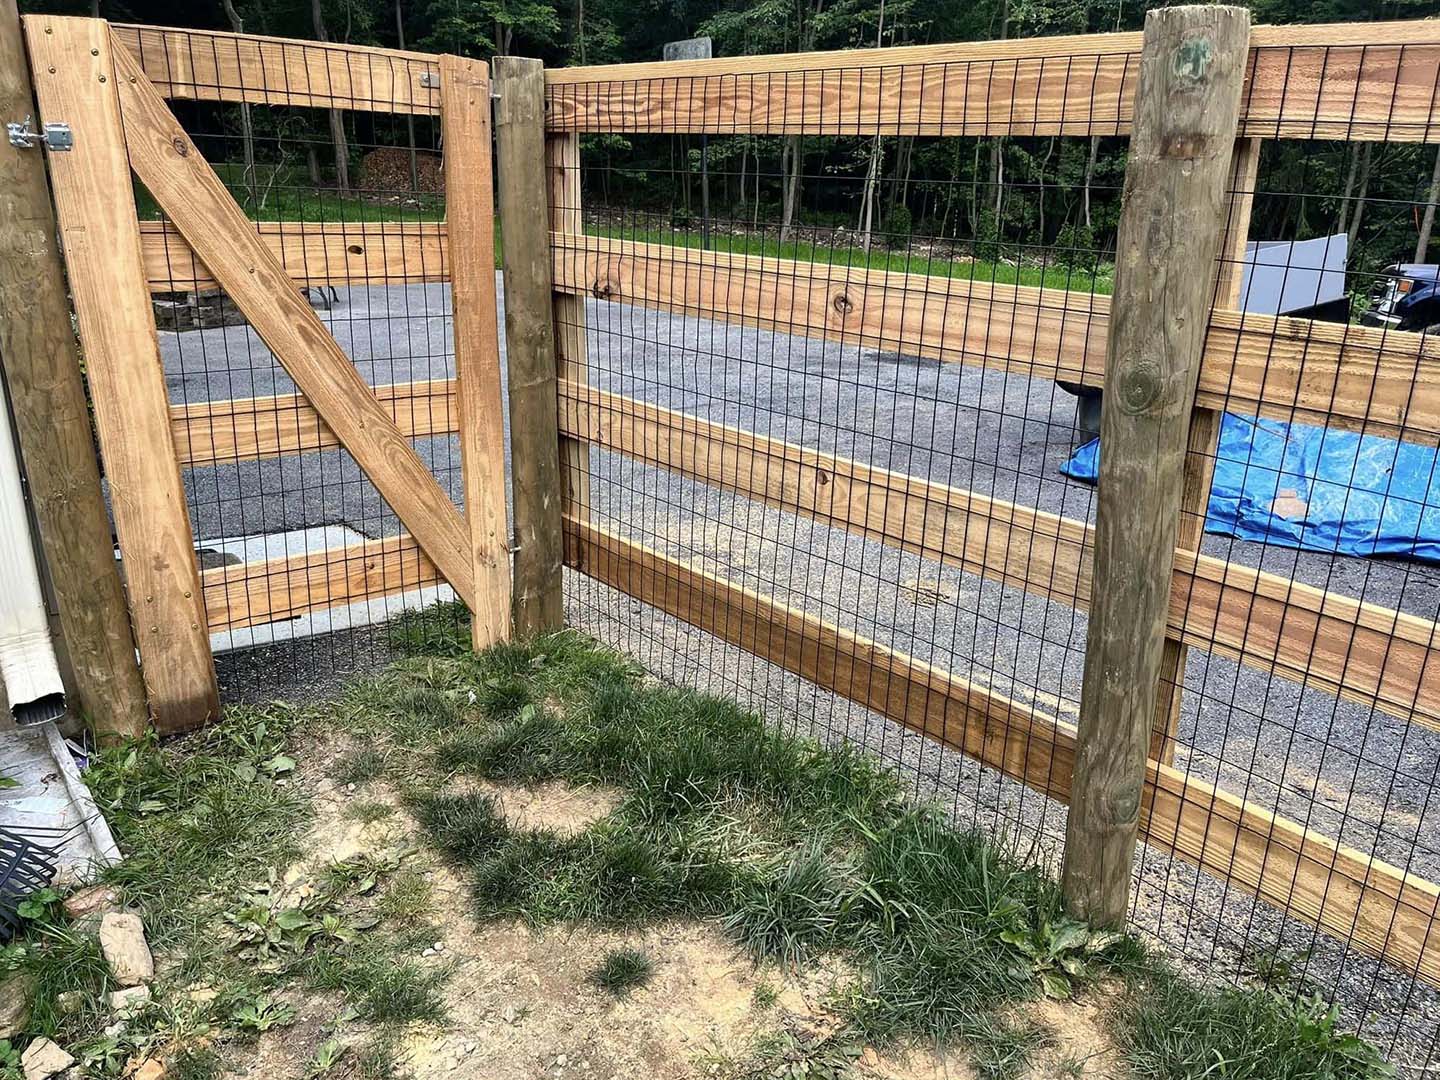 Holtwood Pennsylvania Board Fence With Wire Mesh